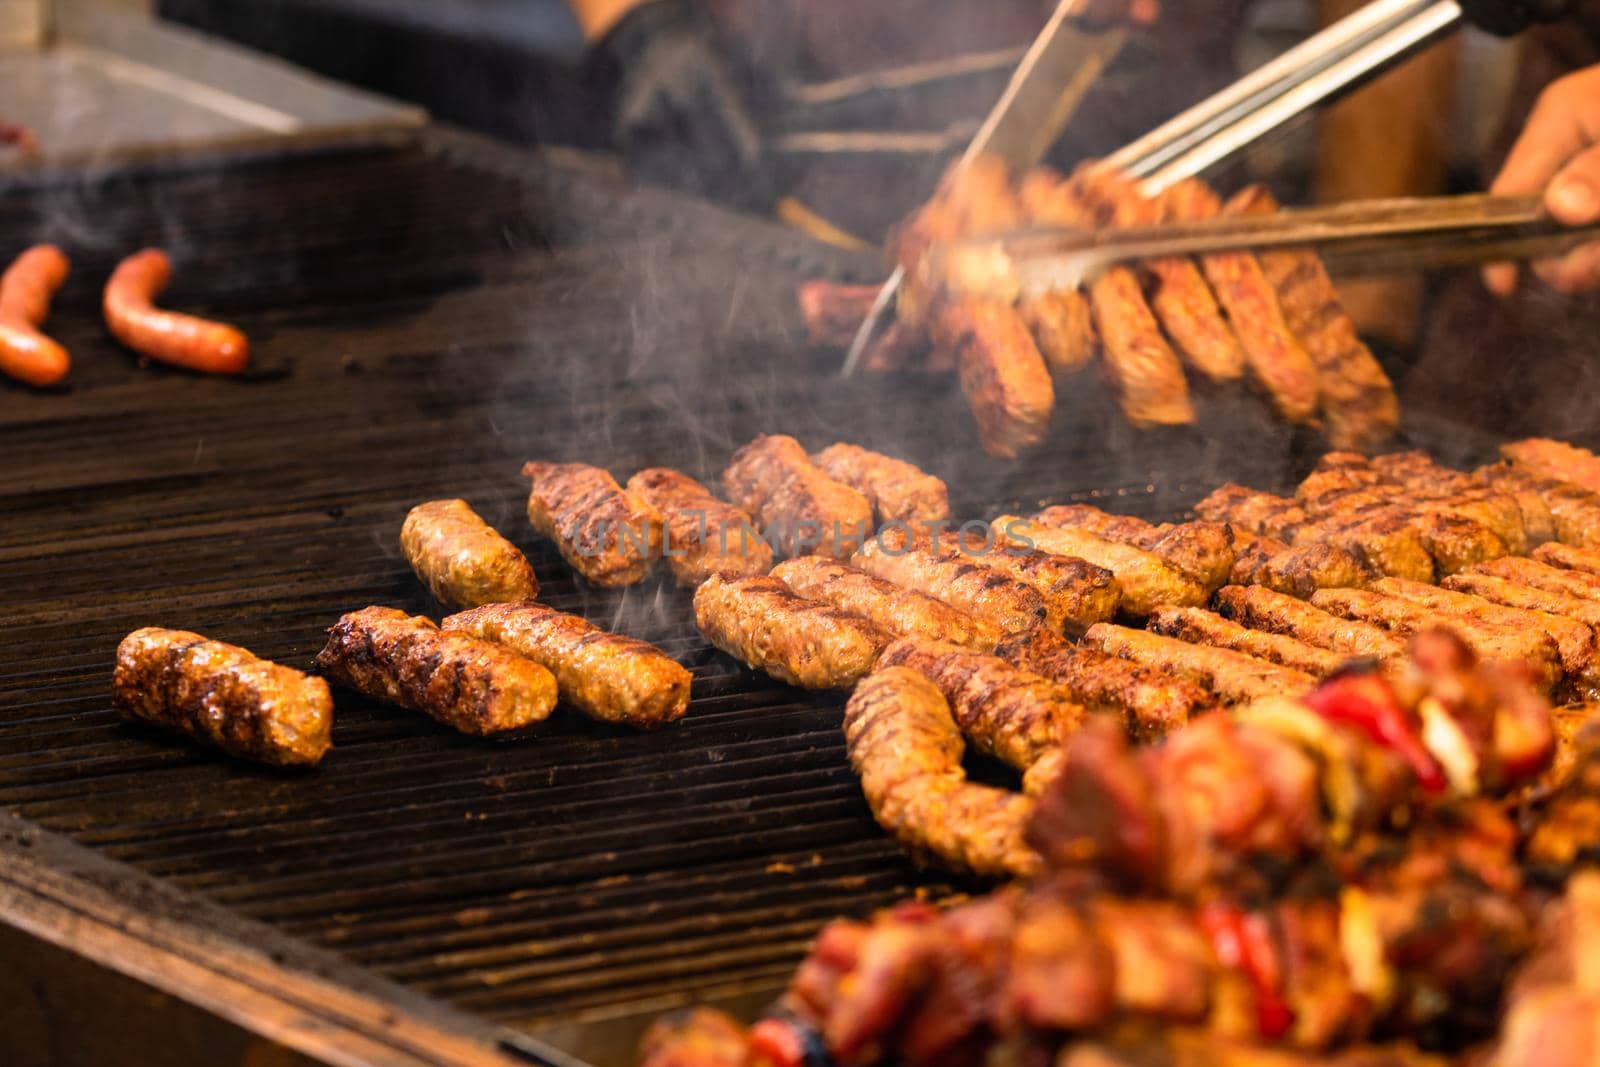 Grilling tasty food on barbecue. Steak, sausages on grill at food festival